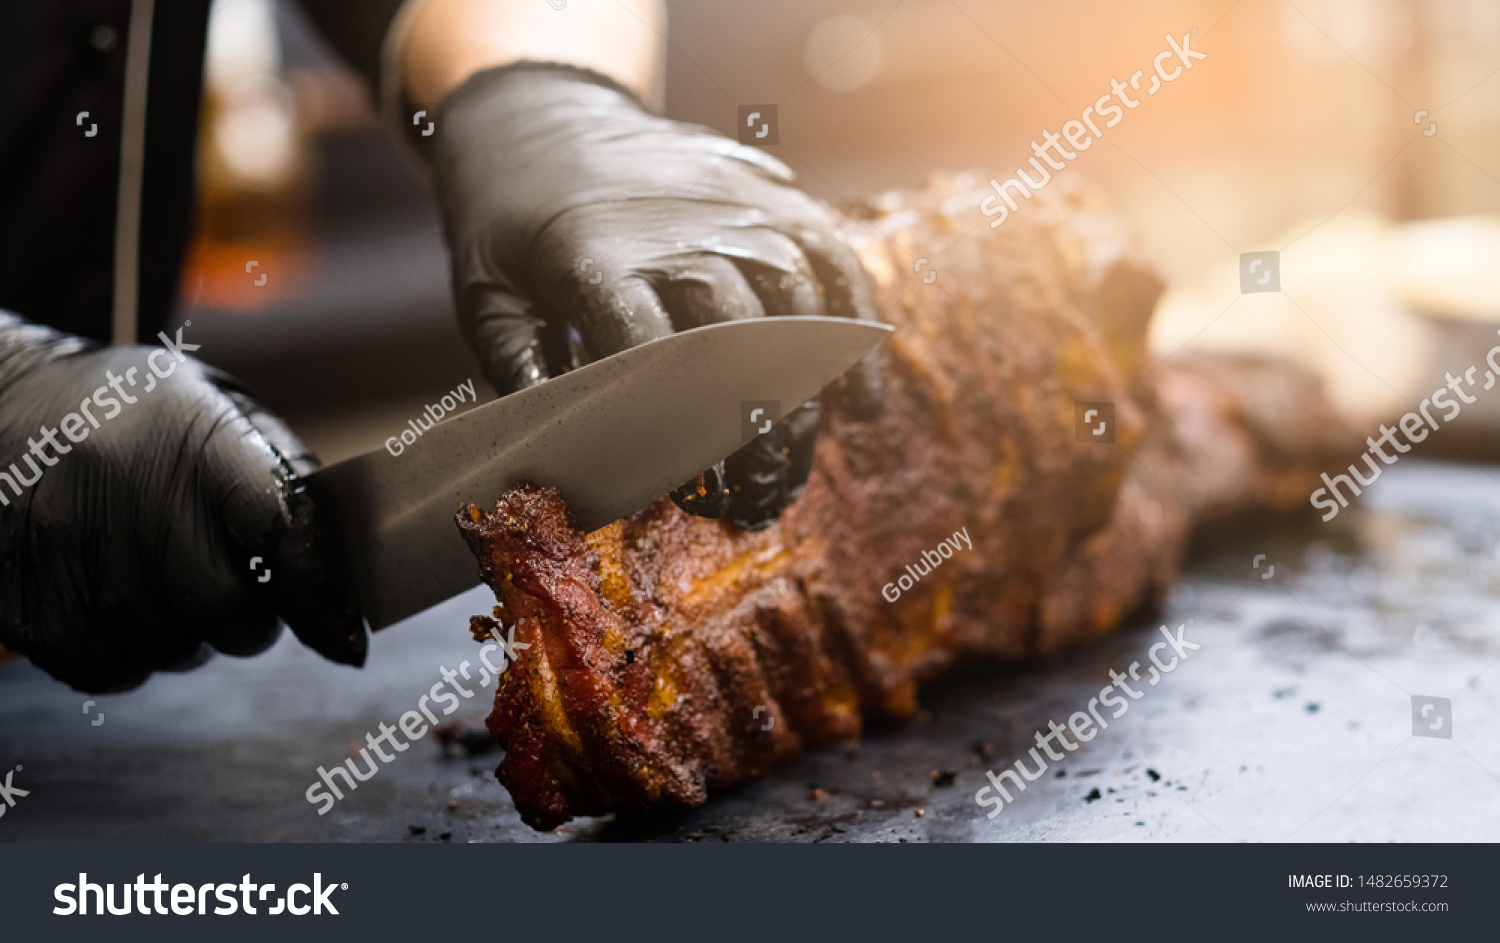 Grill restaurant kitchen. Chef in black cooking gloves using knife to cut smoked pork ribs. #1482659372